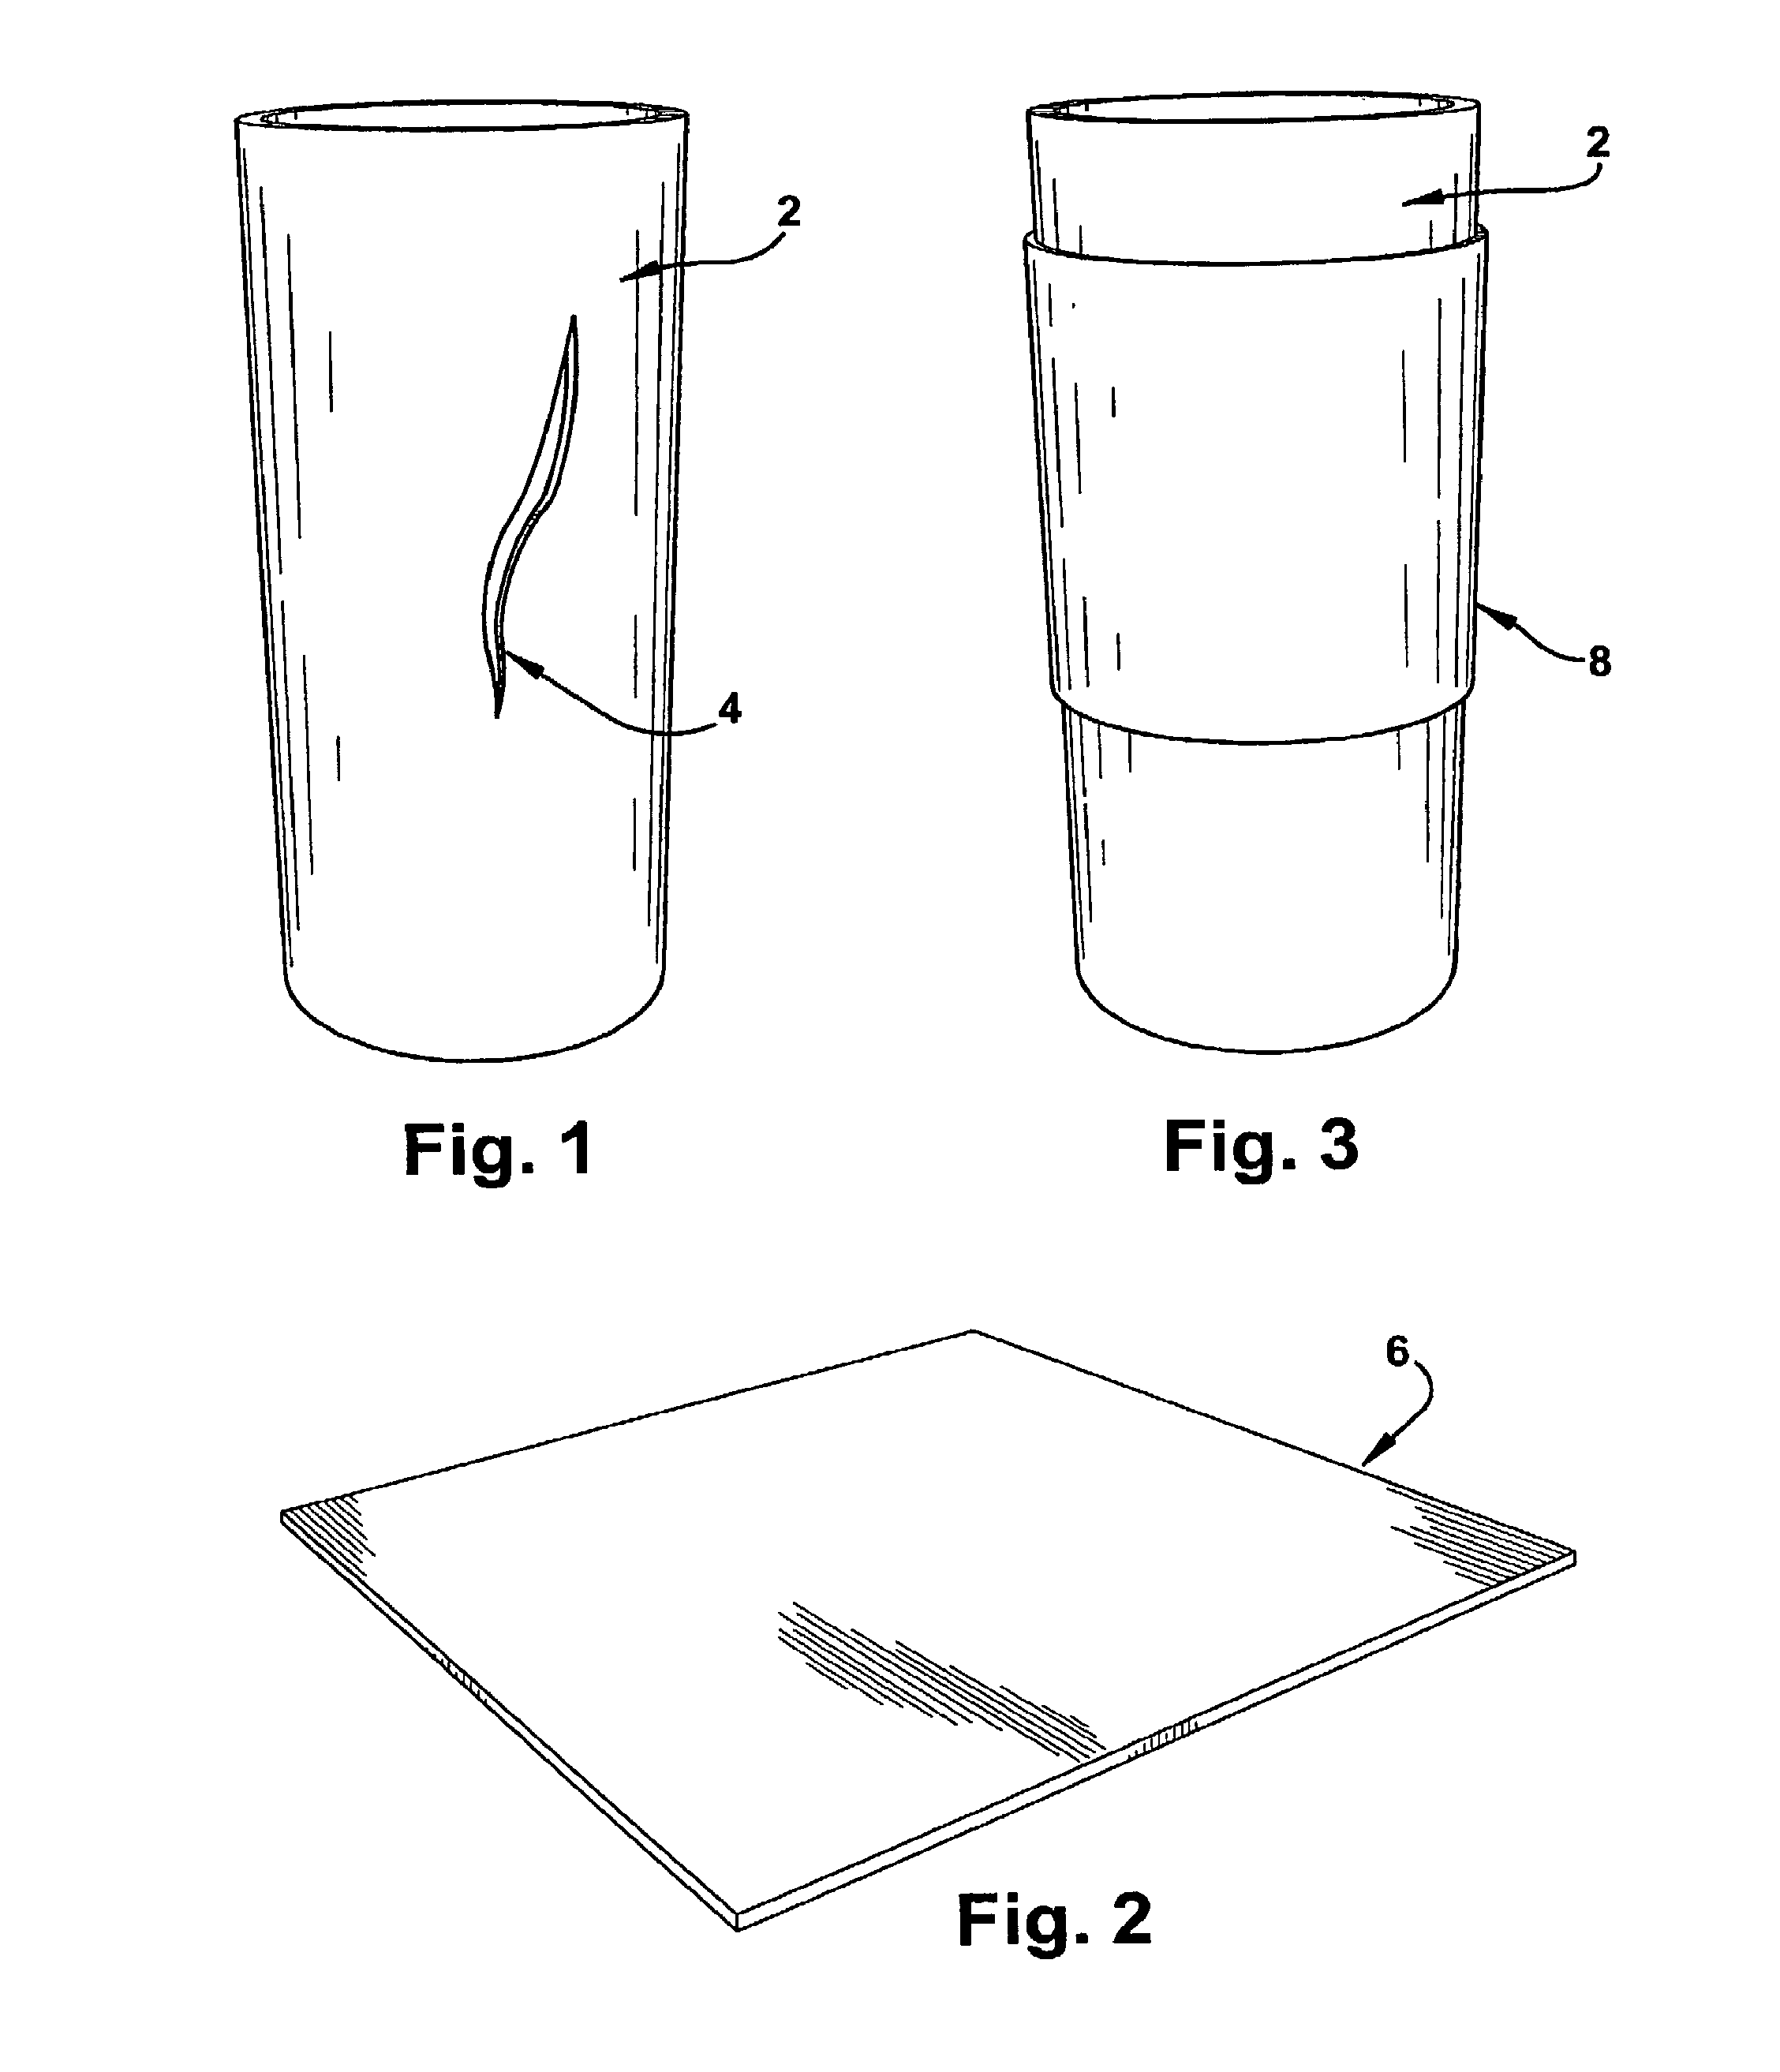 Method of making and using shape memory polymer composite patches